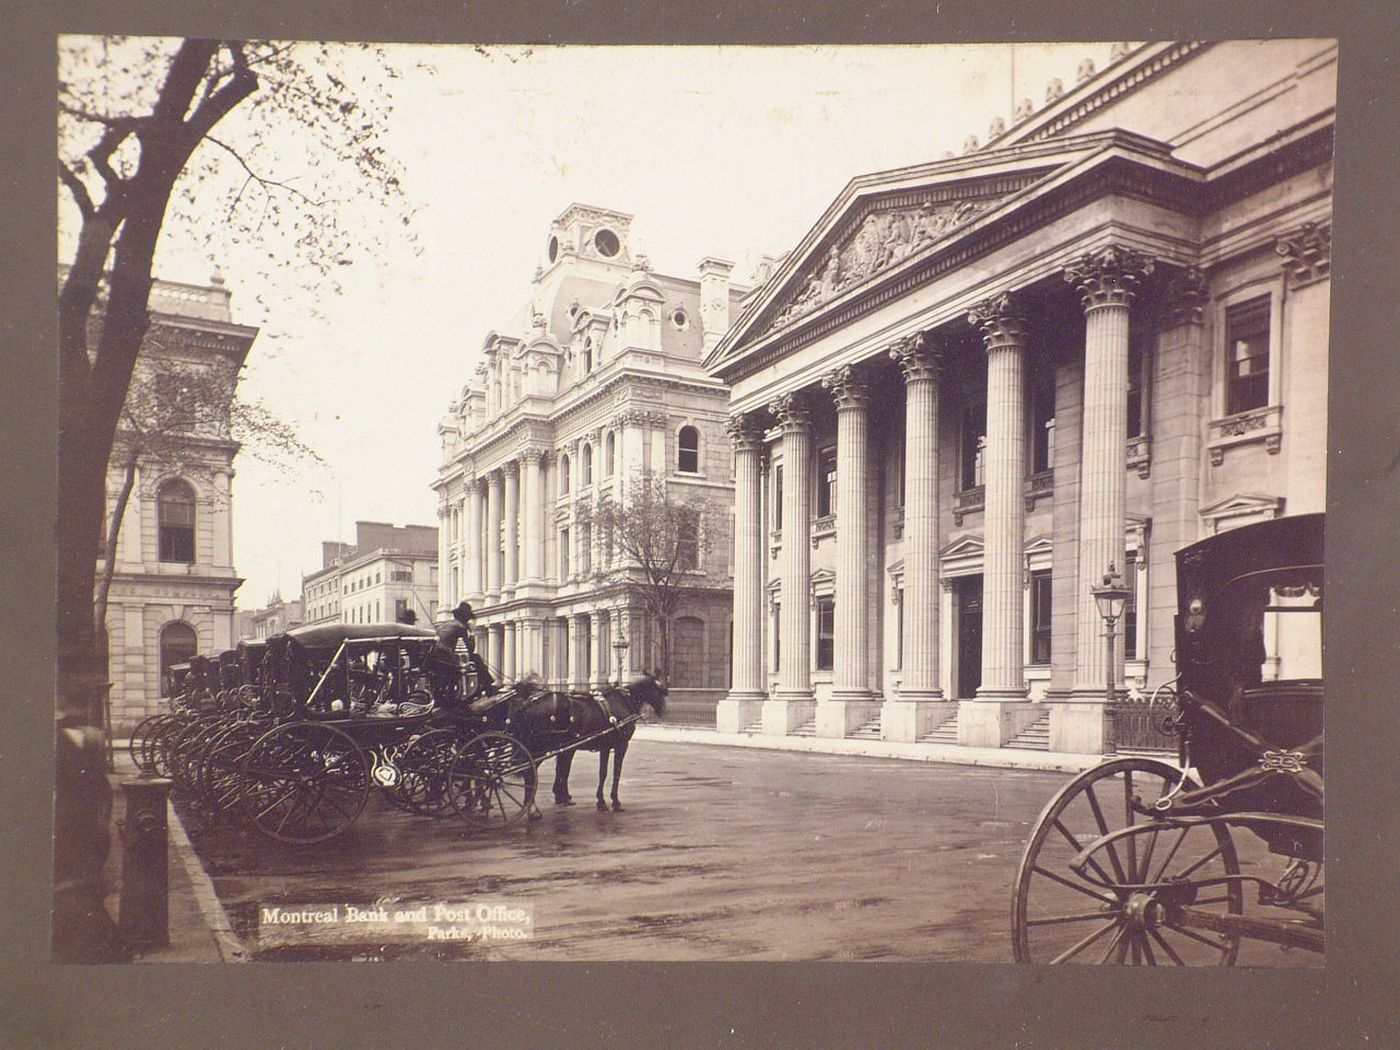 View of Montreal bank and post office with horses and carriages, Place d'Armes, Montreal, Quebec, Canada